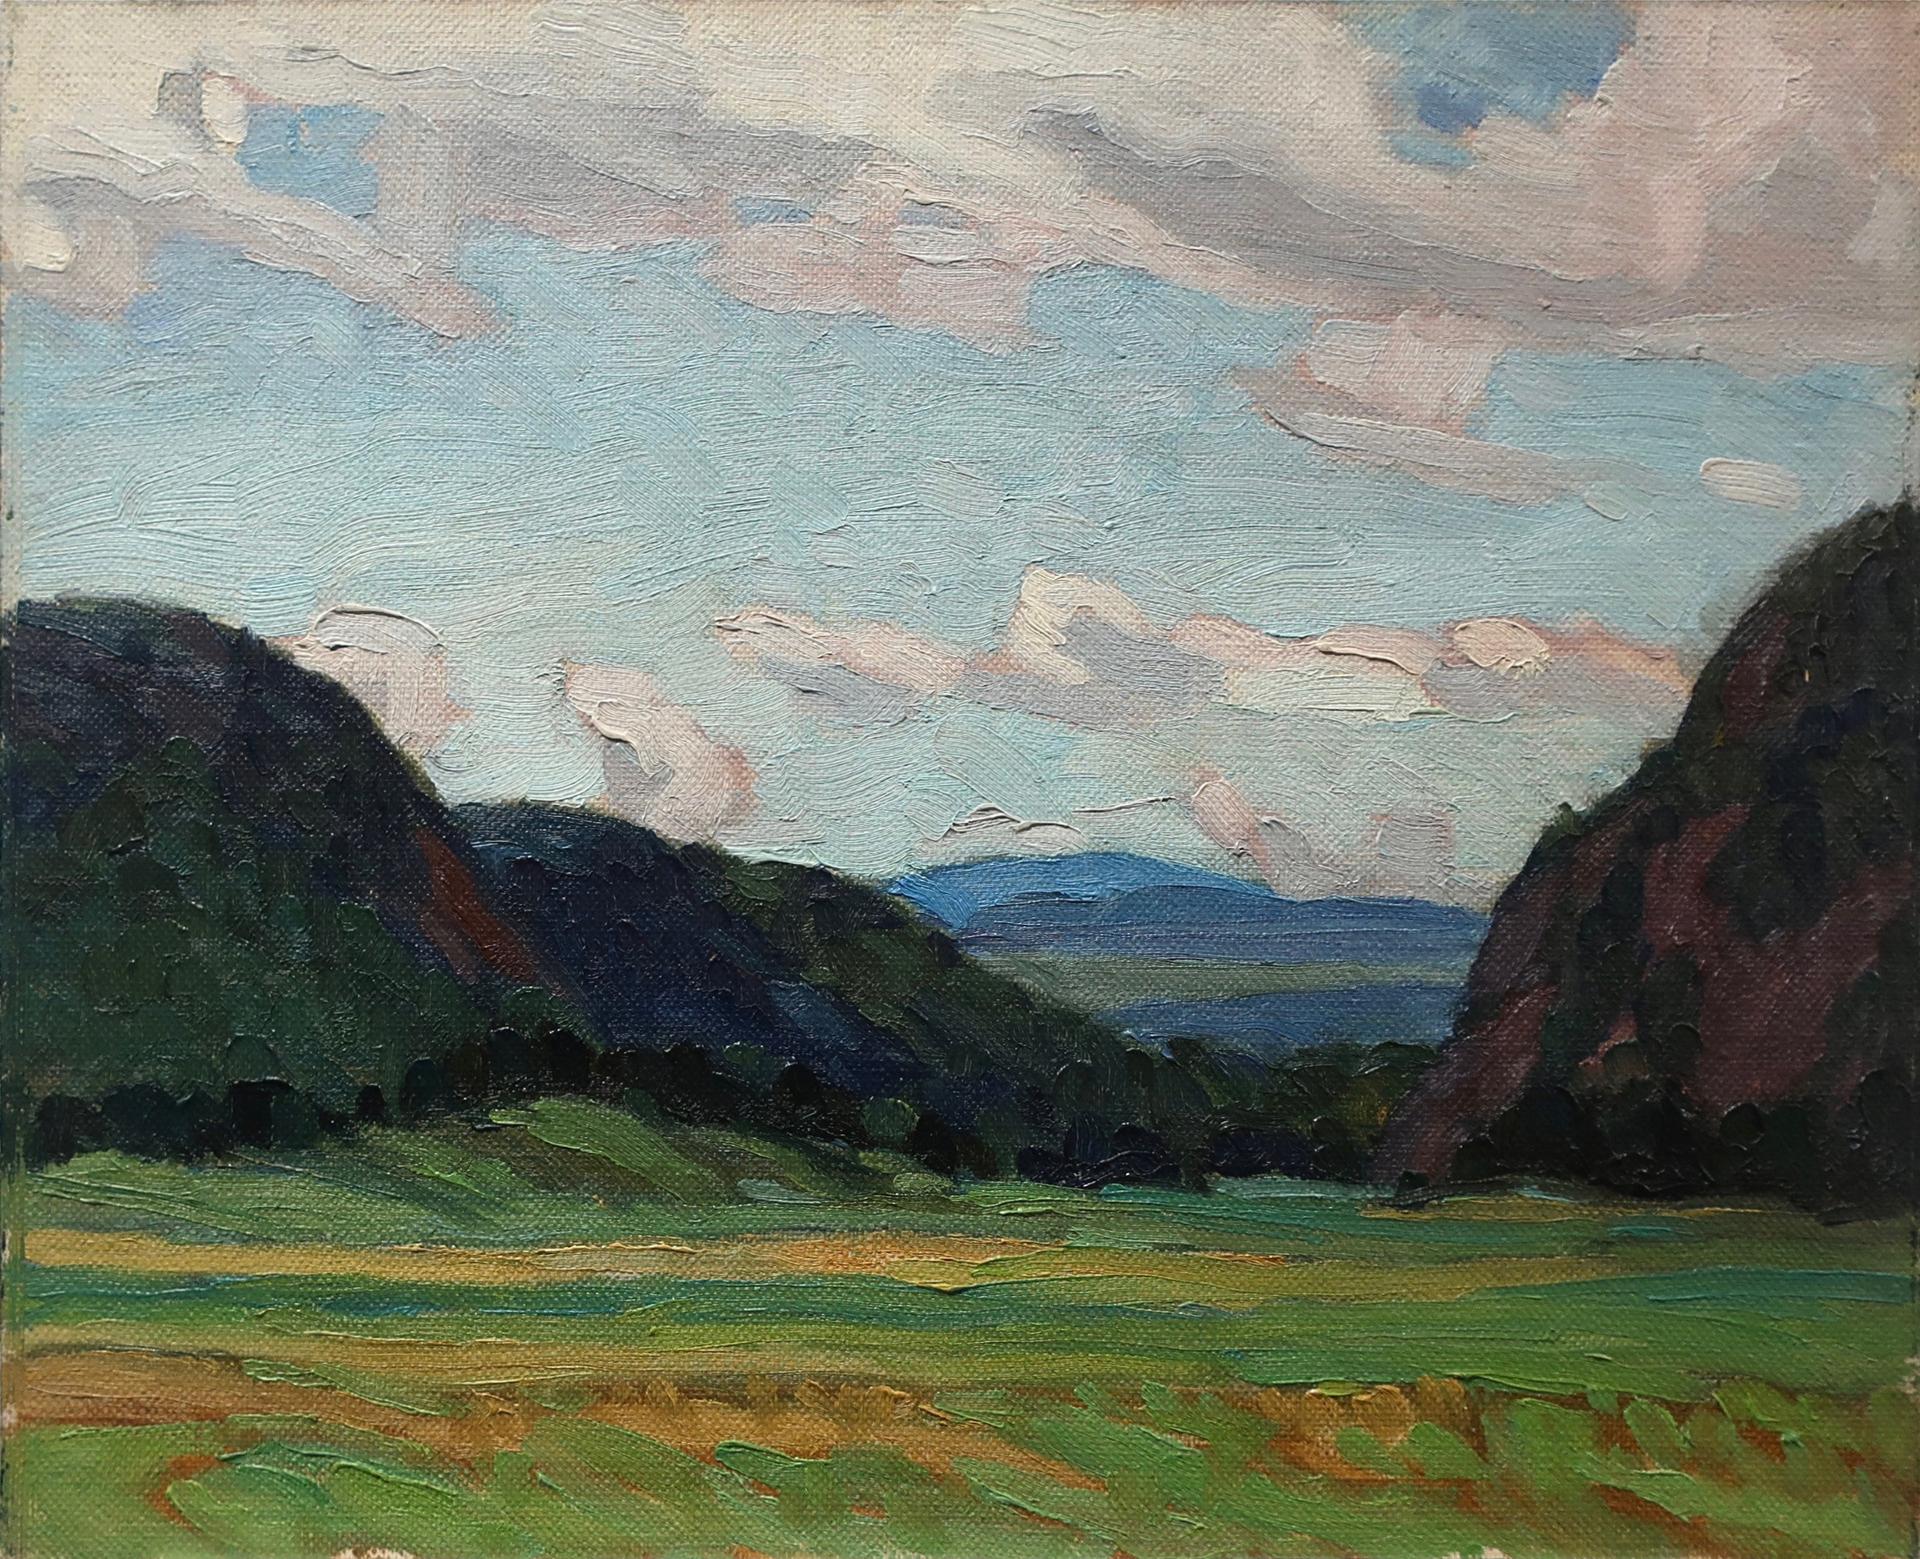 George Henry Griffin (1898-1974) - Untitled (Clouds Over Valley)